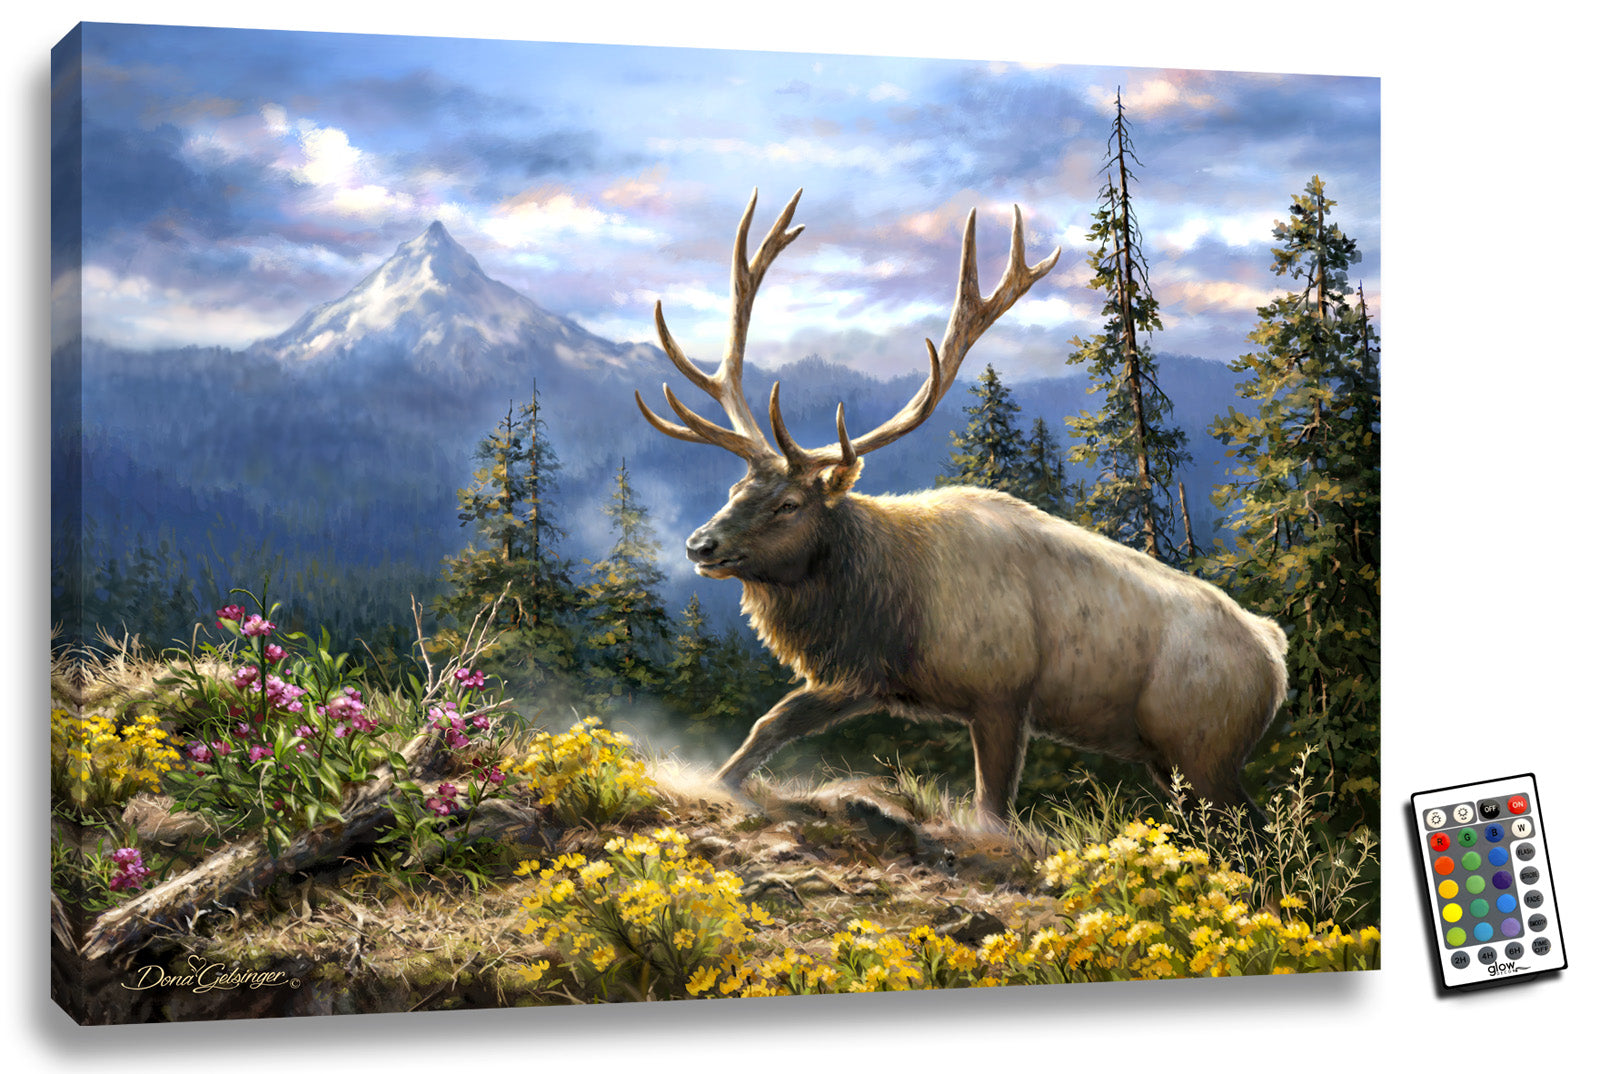 This stunning piece showcases a majestic elk standing strong on a rocky bluff, surrounded by vibrant yellow and pink flowers that lend an air of delicacy and beauty to the scene.  The elk's regal stature is emphasized by the lush forest and towering peak in the background.